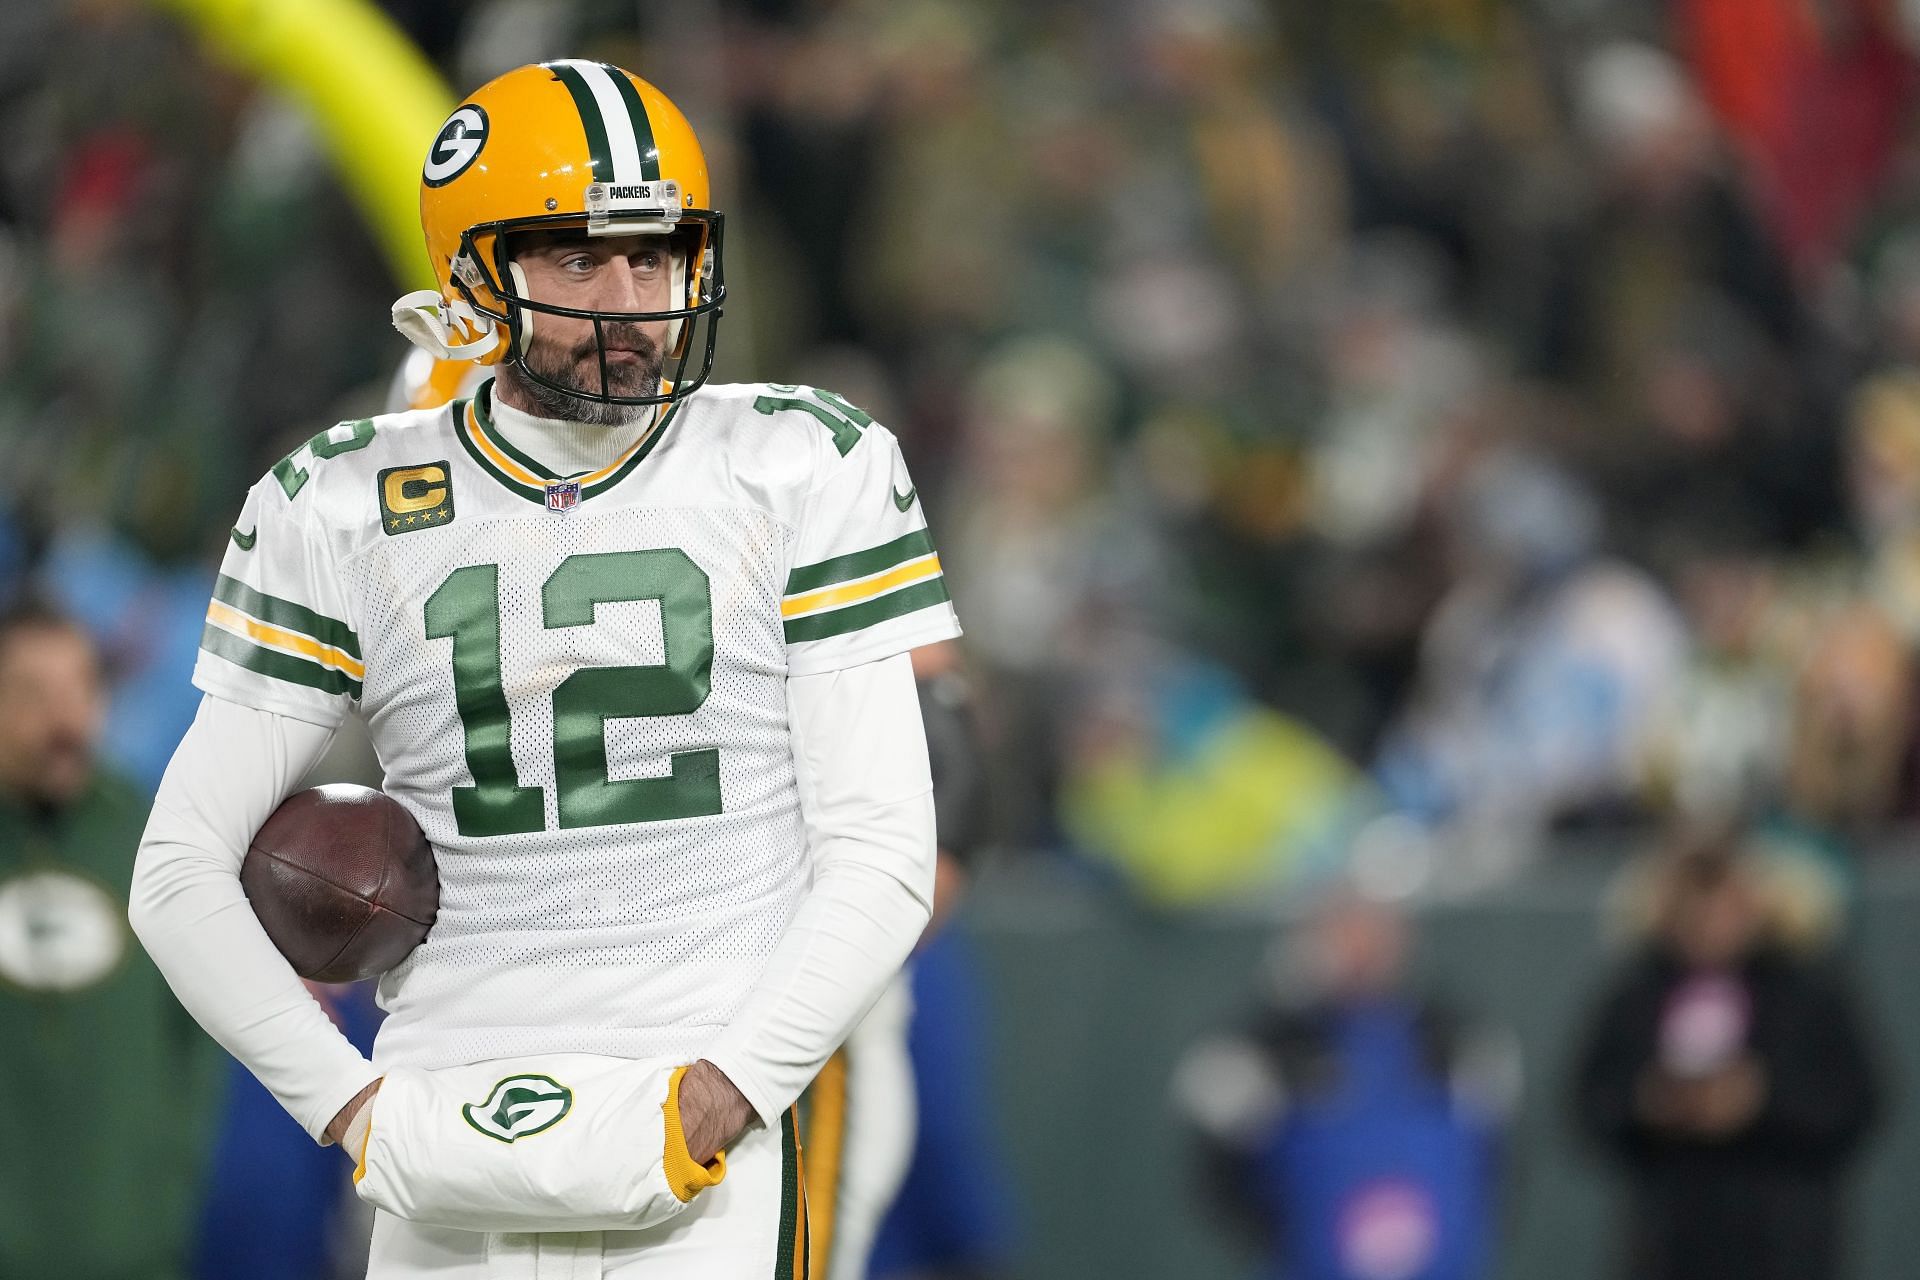 Aaron Rodgers and the Packers were booed at home vs Titans